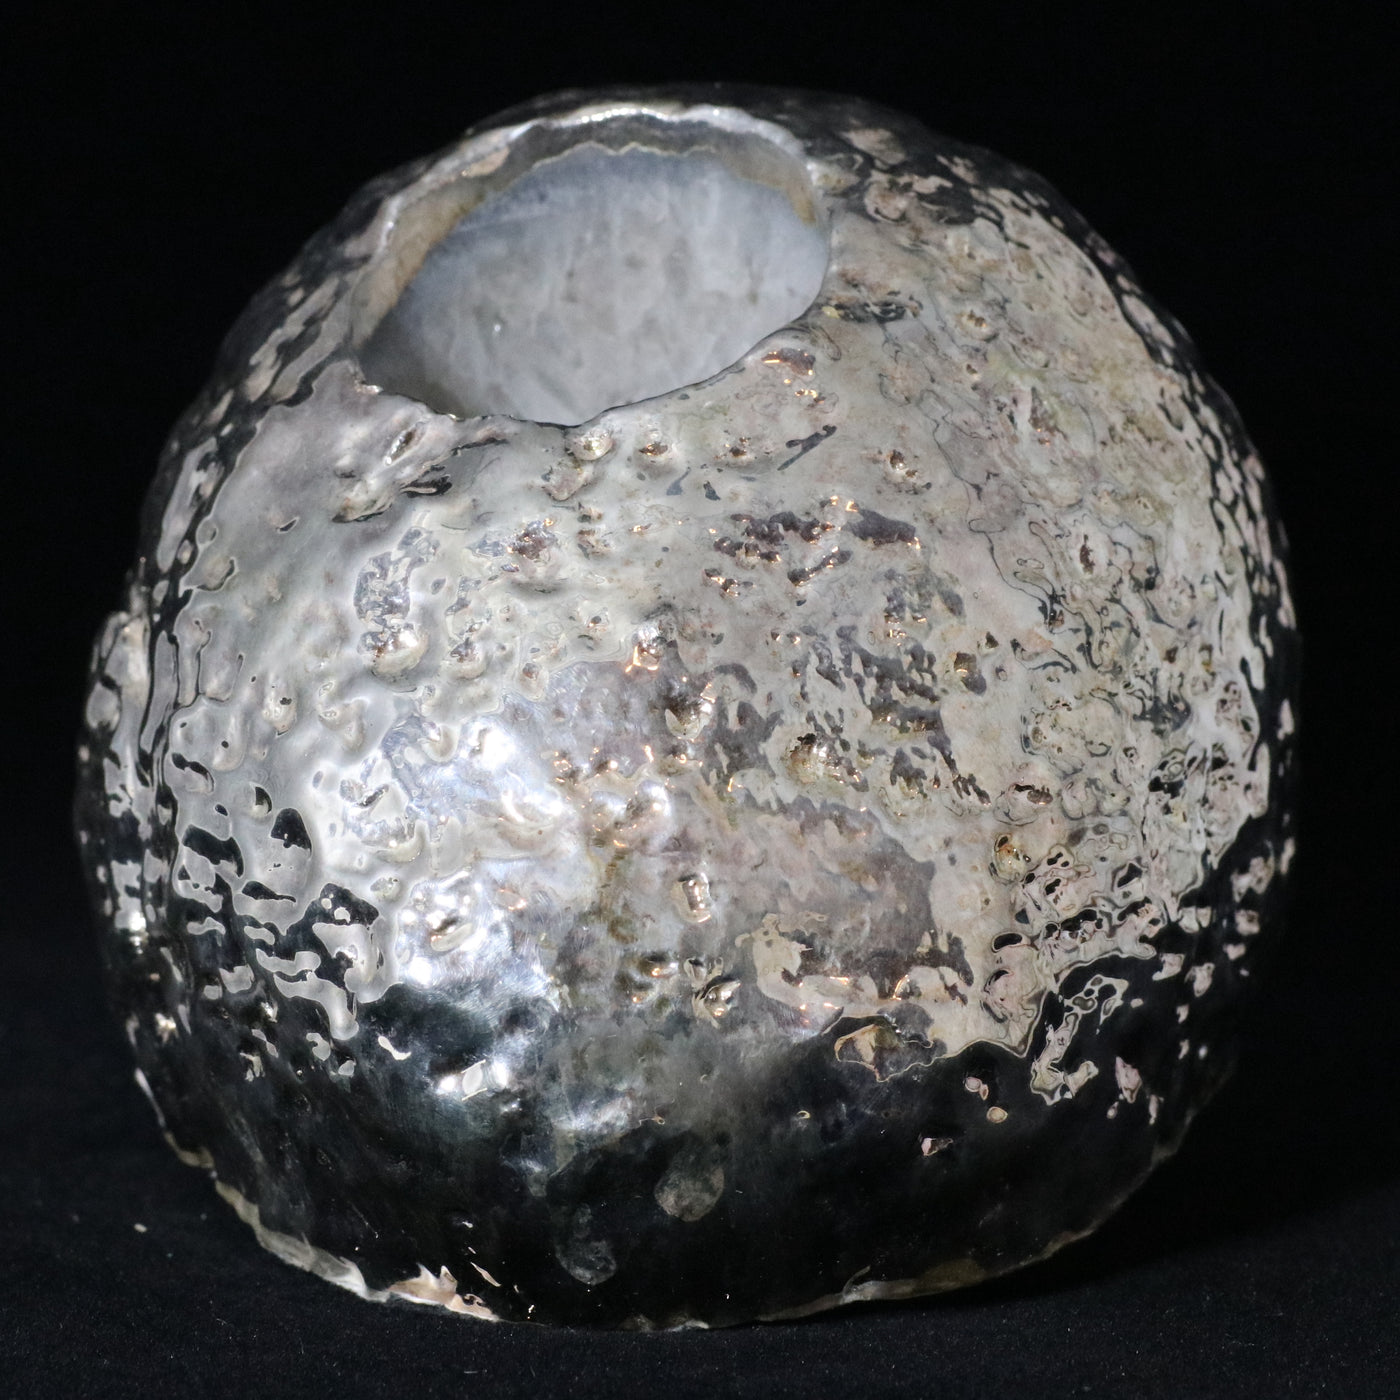 630 Geode Candle Holder 2LB 3.5IN X 4IN